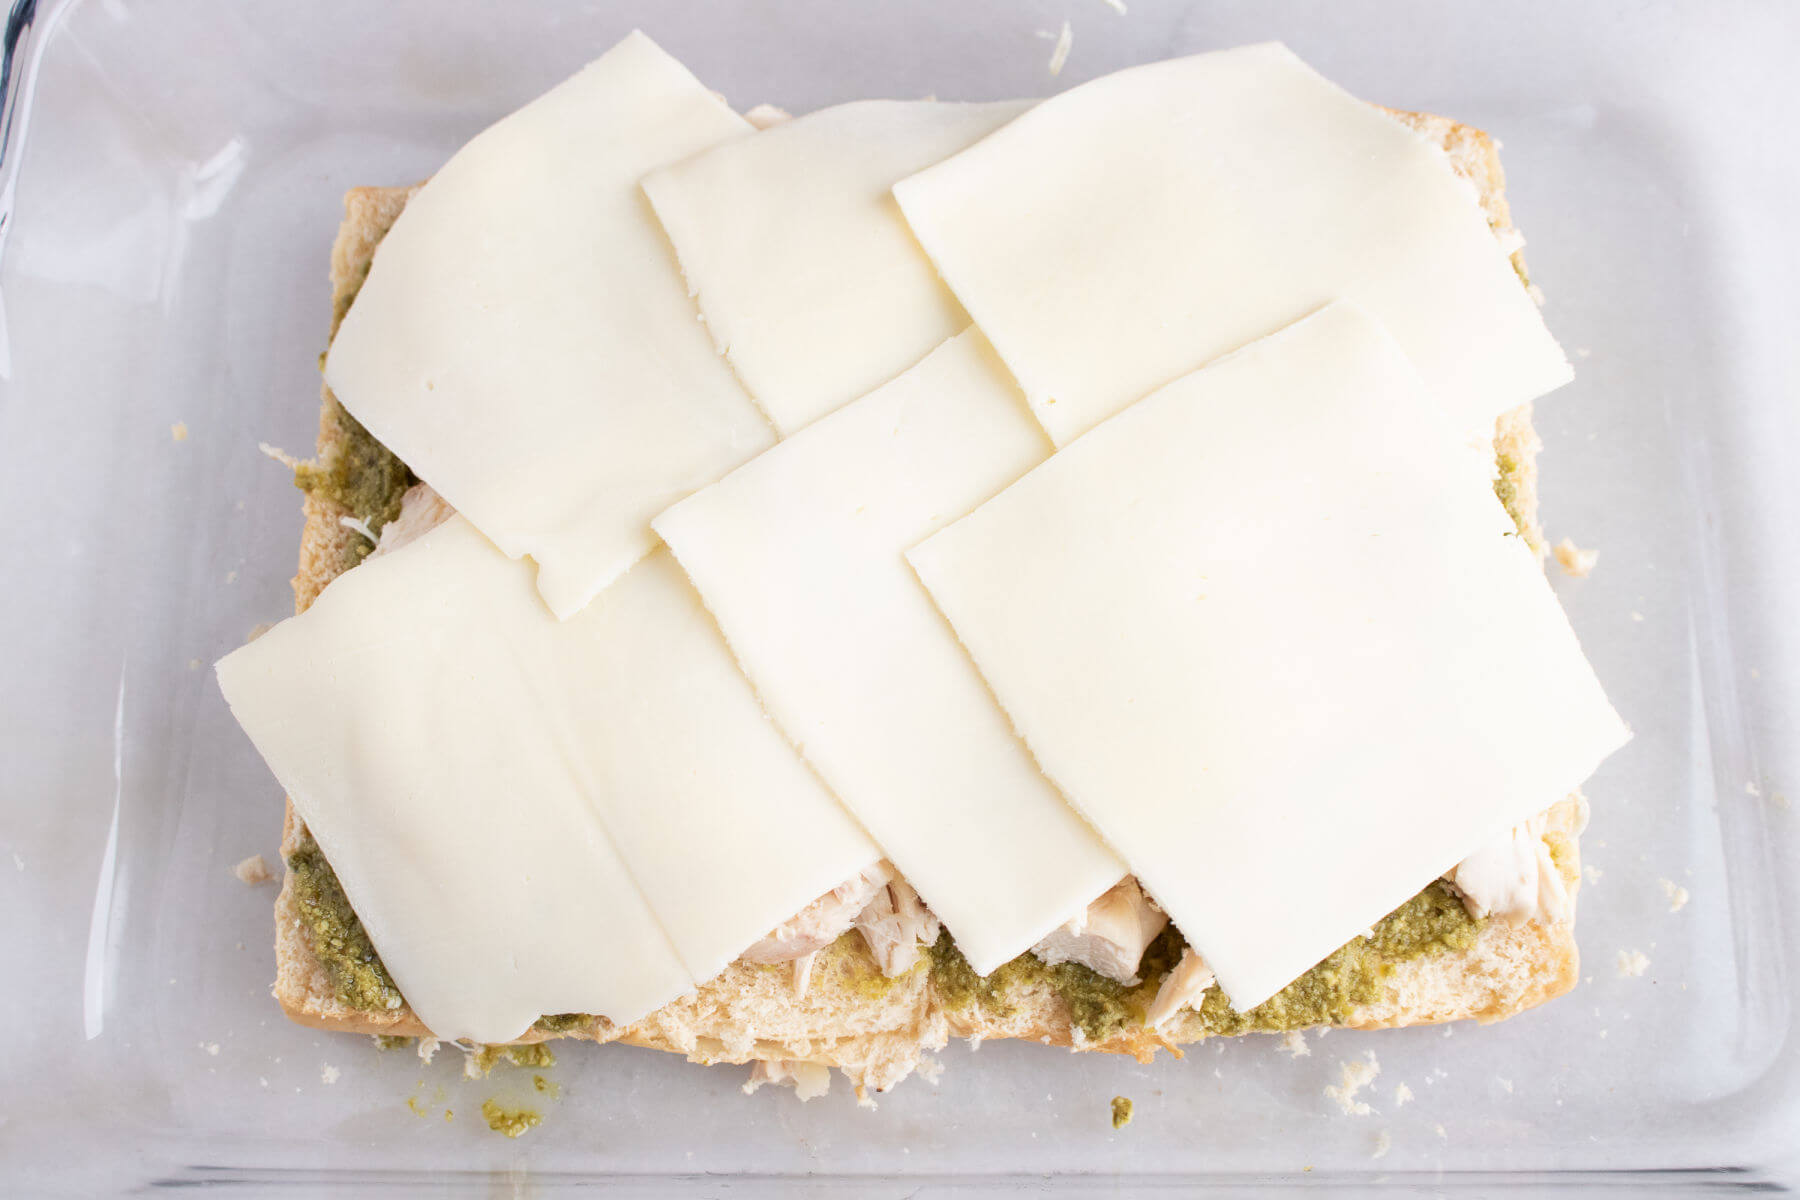 Cover chicken and pesto with cheese